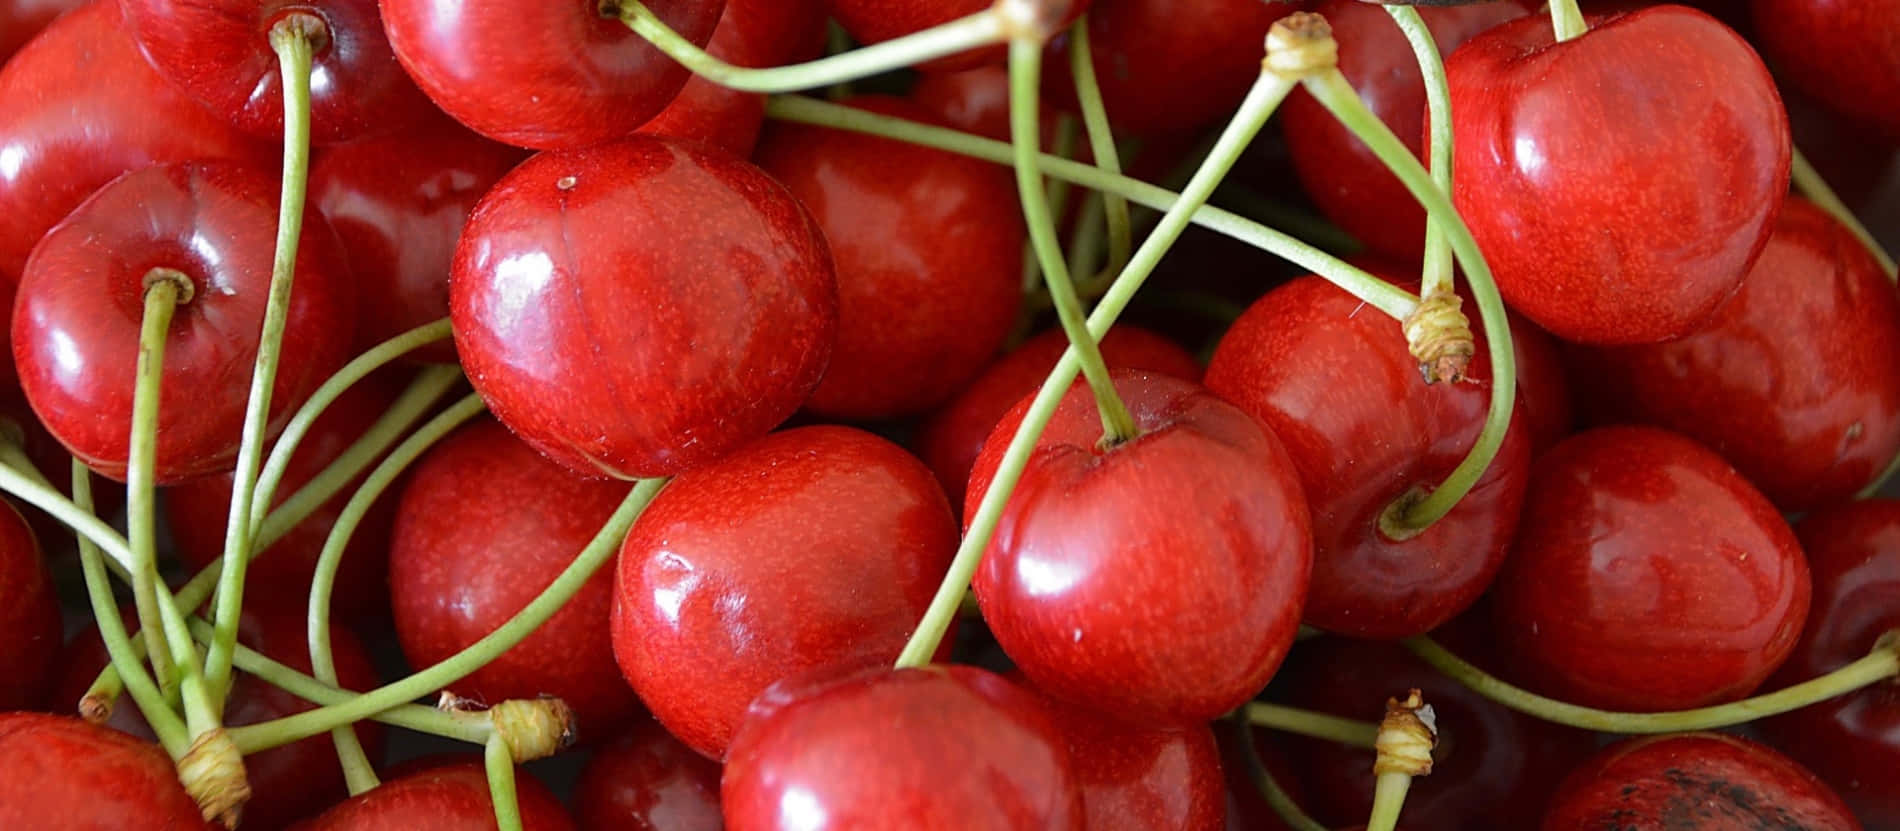 Vibrant Red Cherries on a Branch Wallpaper